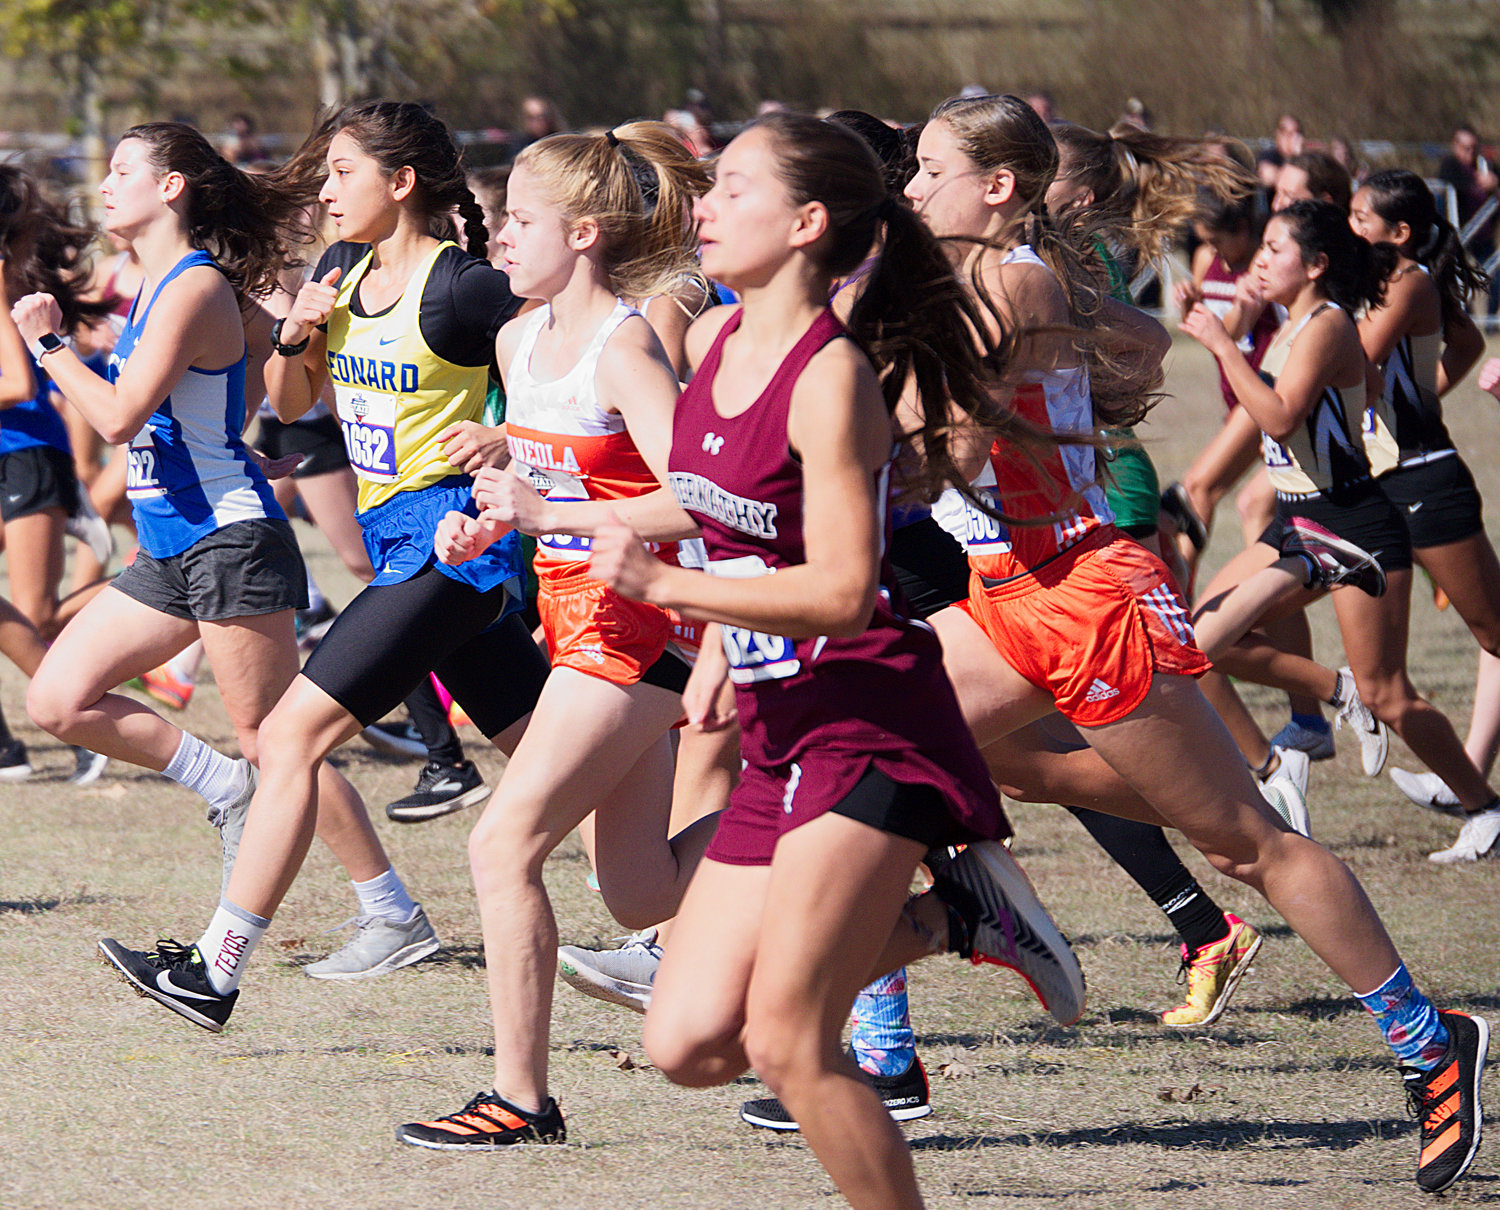 Juliana Stanley and Hannah Zoch, clad in orange, keep up with the rapid pace of their competitors near the front shortly after the start of the 3A girls cross country championship meet at Old Settlers Park in Round Rock on Saturday.